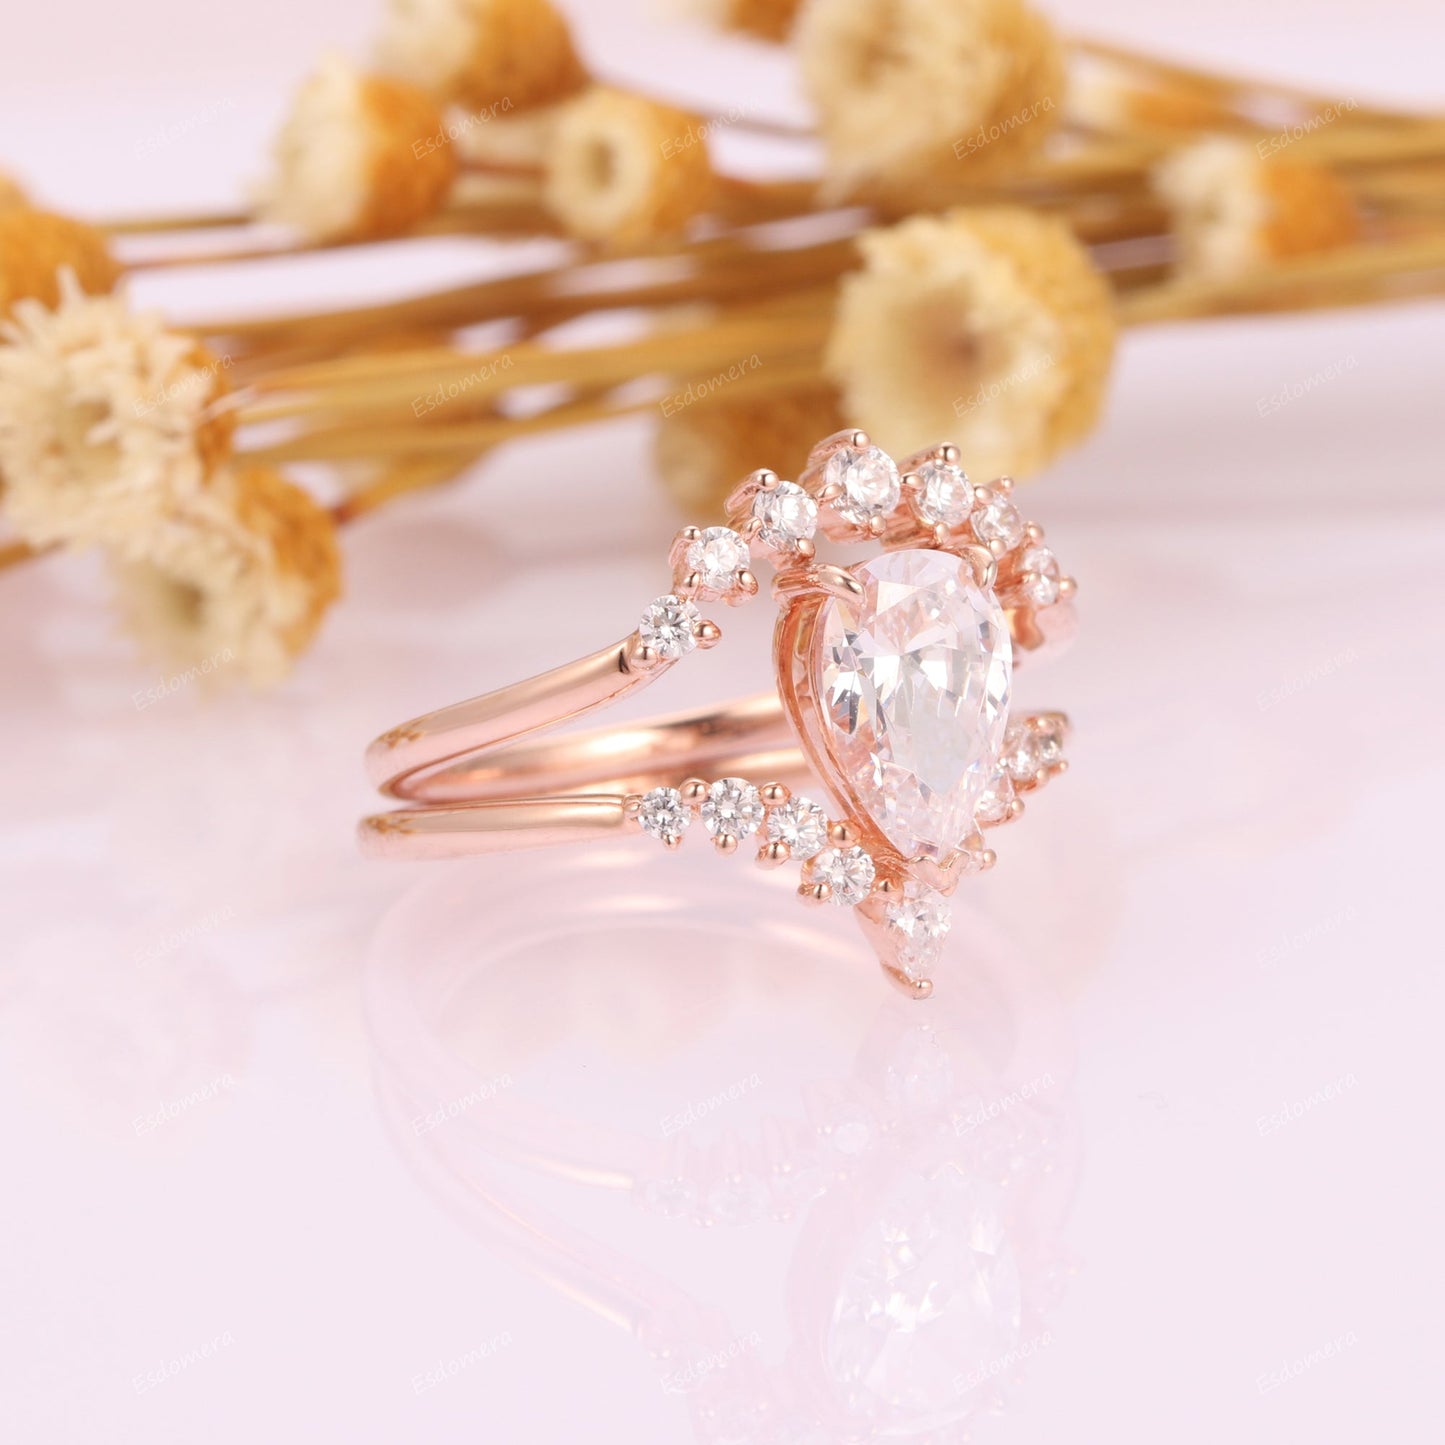 2pcs Vintage 14k Rose Gold Bridal Ring Sets, 1.5CT Pear Cut Moissanite Engagement Ring For Her, Moissanites Accents Curved Shank Promise Wedding Band